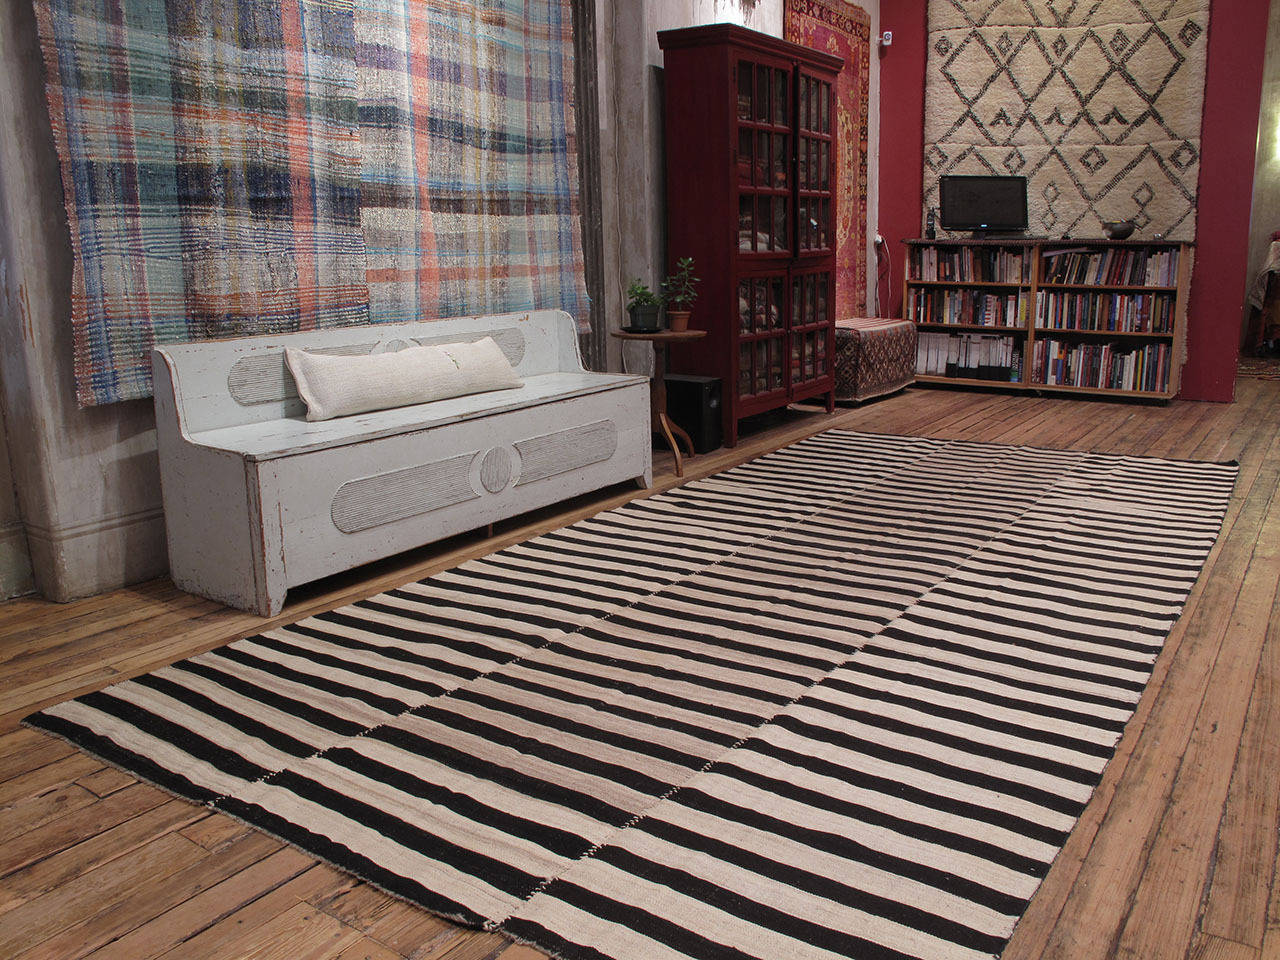 An old tribal floor cover from Northern Iran, woven in three narrow panels with alternating bands of ivory and dark brown or black. A strikingly modern look, with great texture and patina that cannot be replicated in contemporary weavings.
(Size